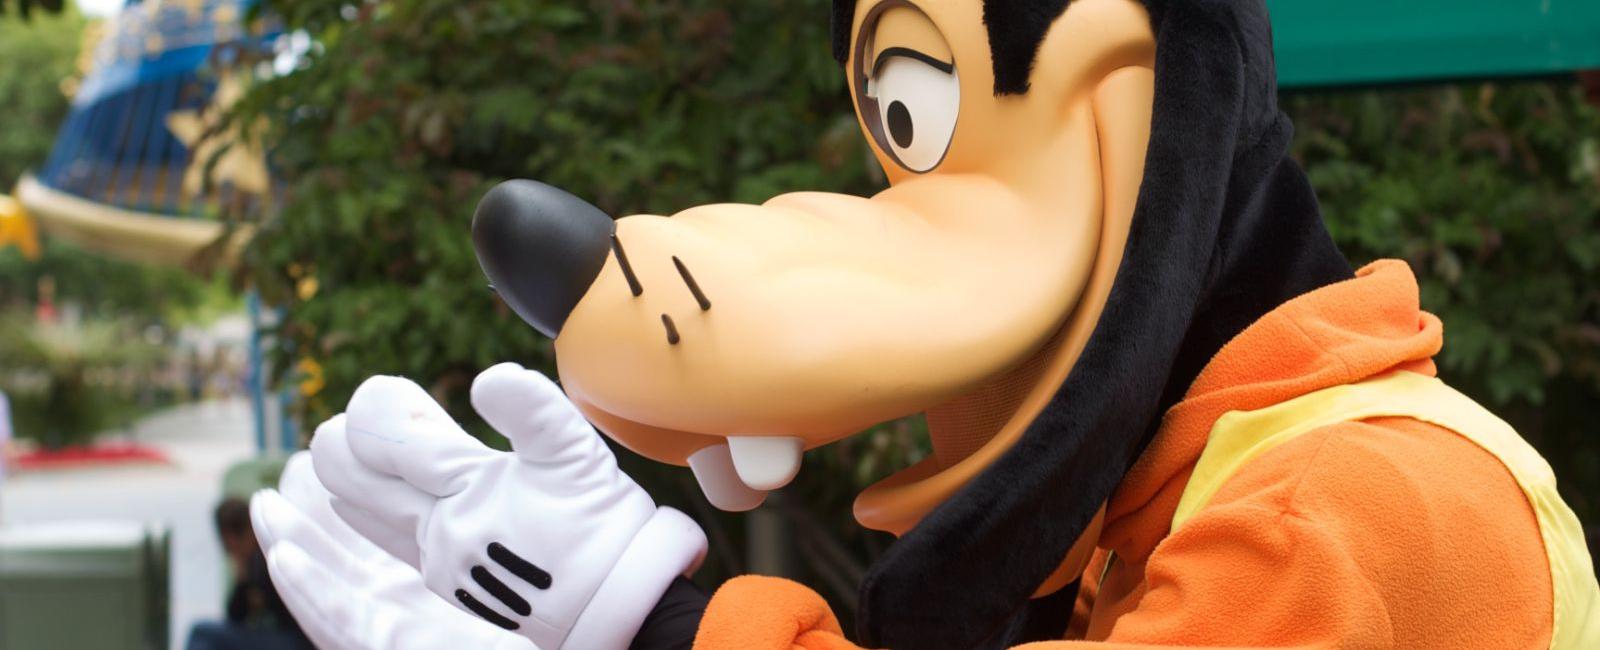 Is Goofy a Dog, a Cow, or Something Else Entirely?